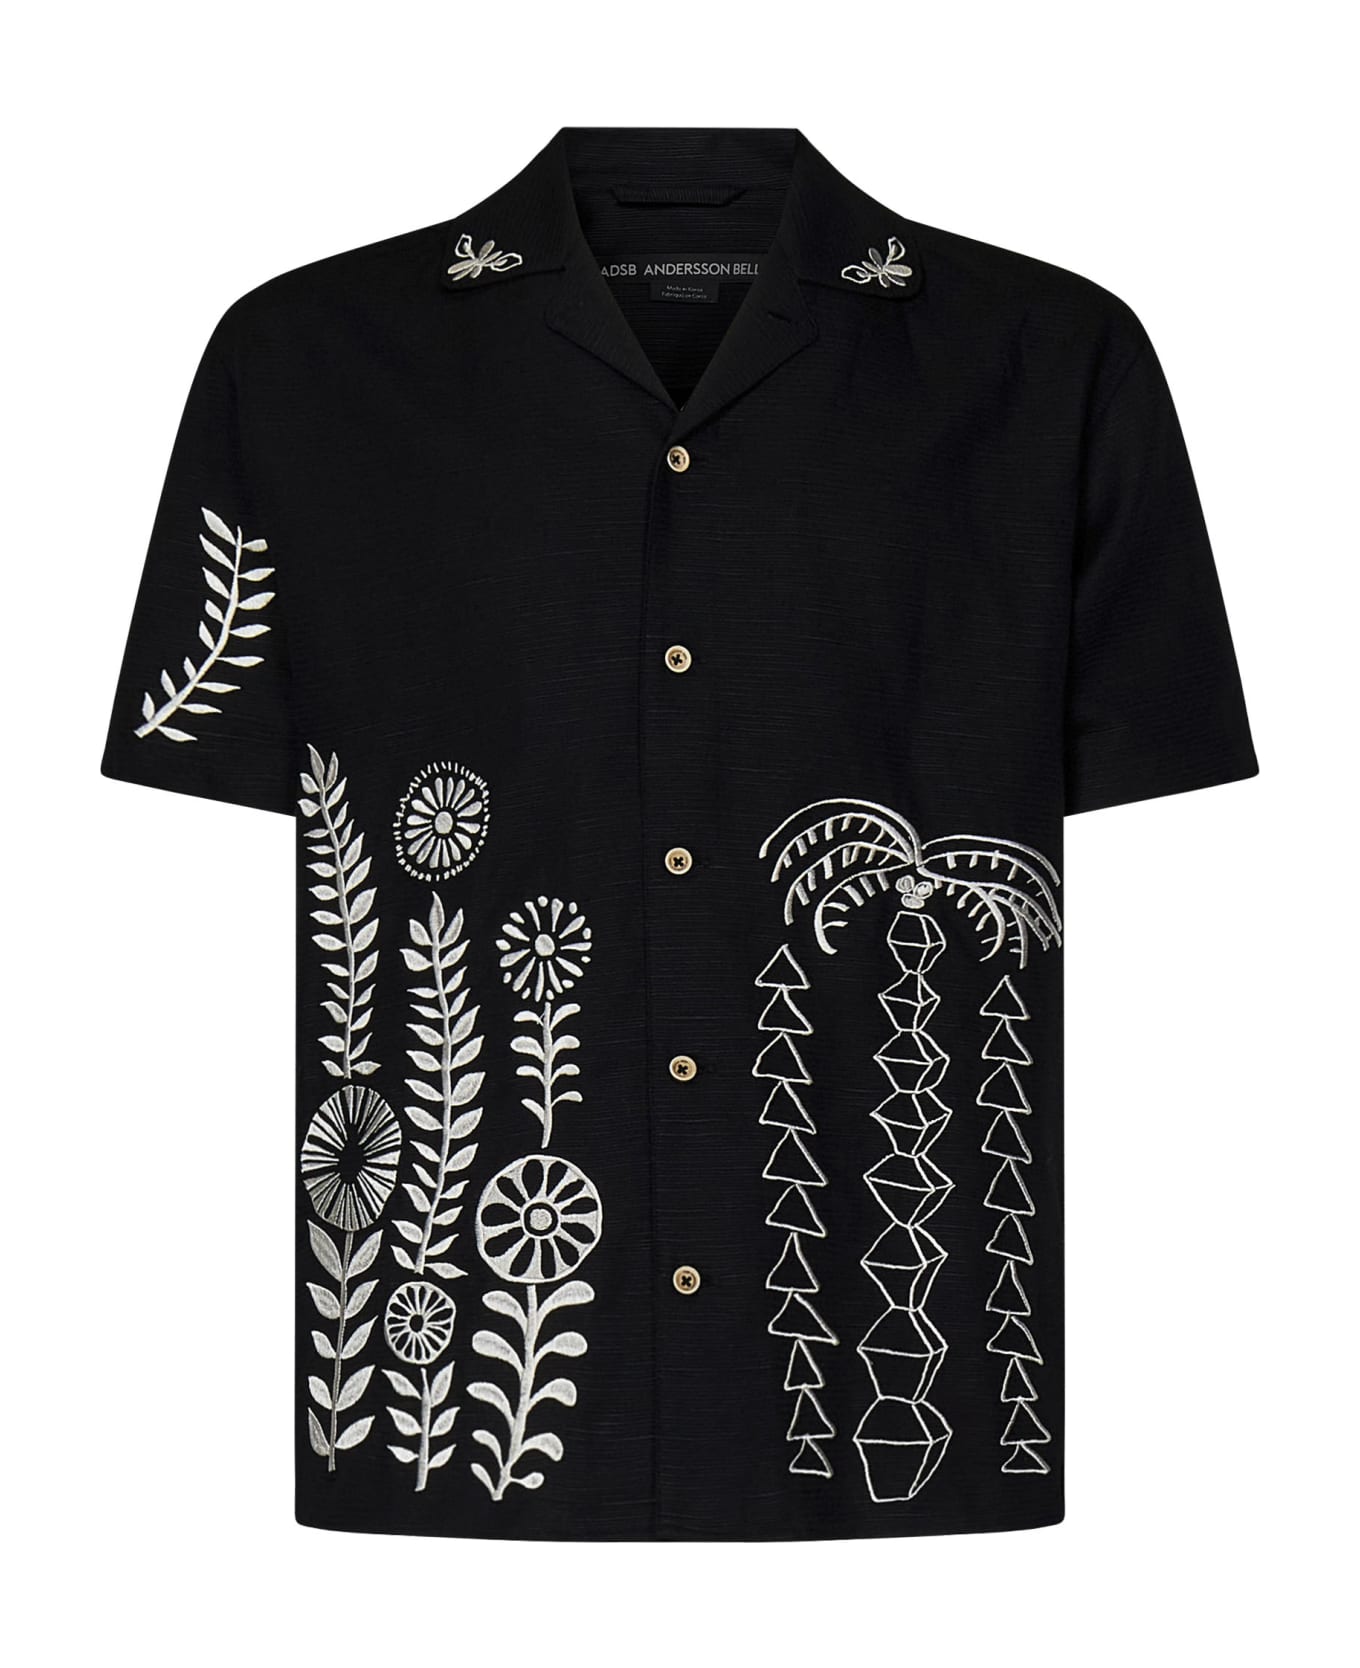 Andersson Bell Shirt - BLACK/WHITE